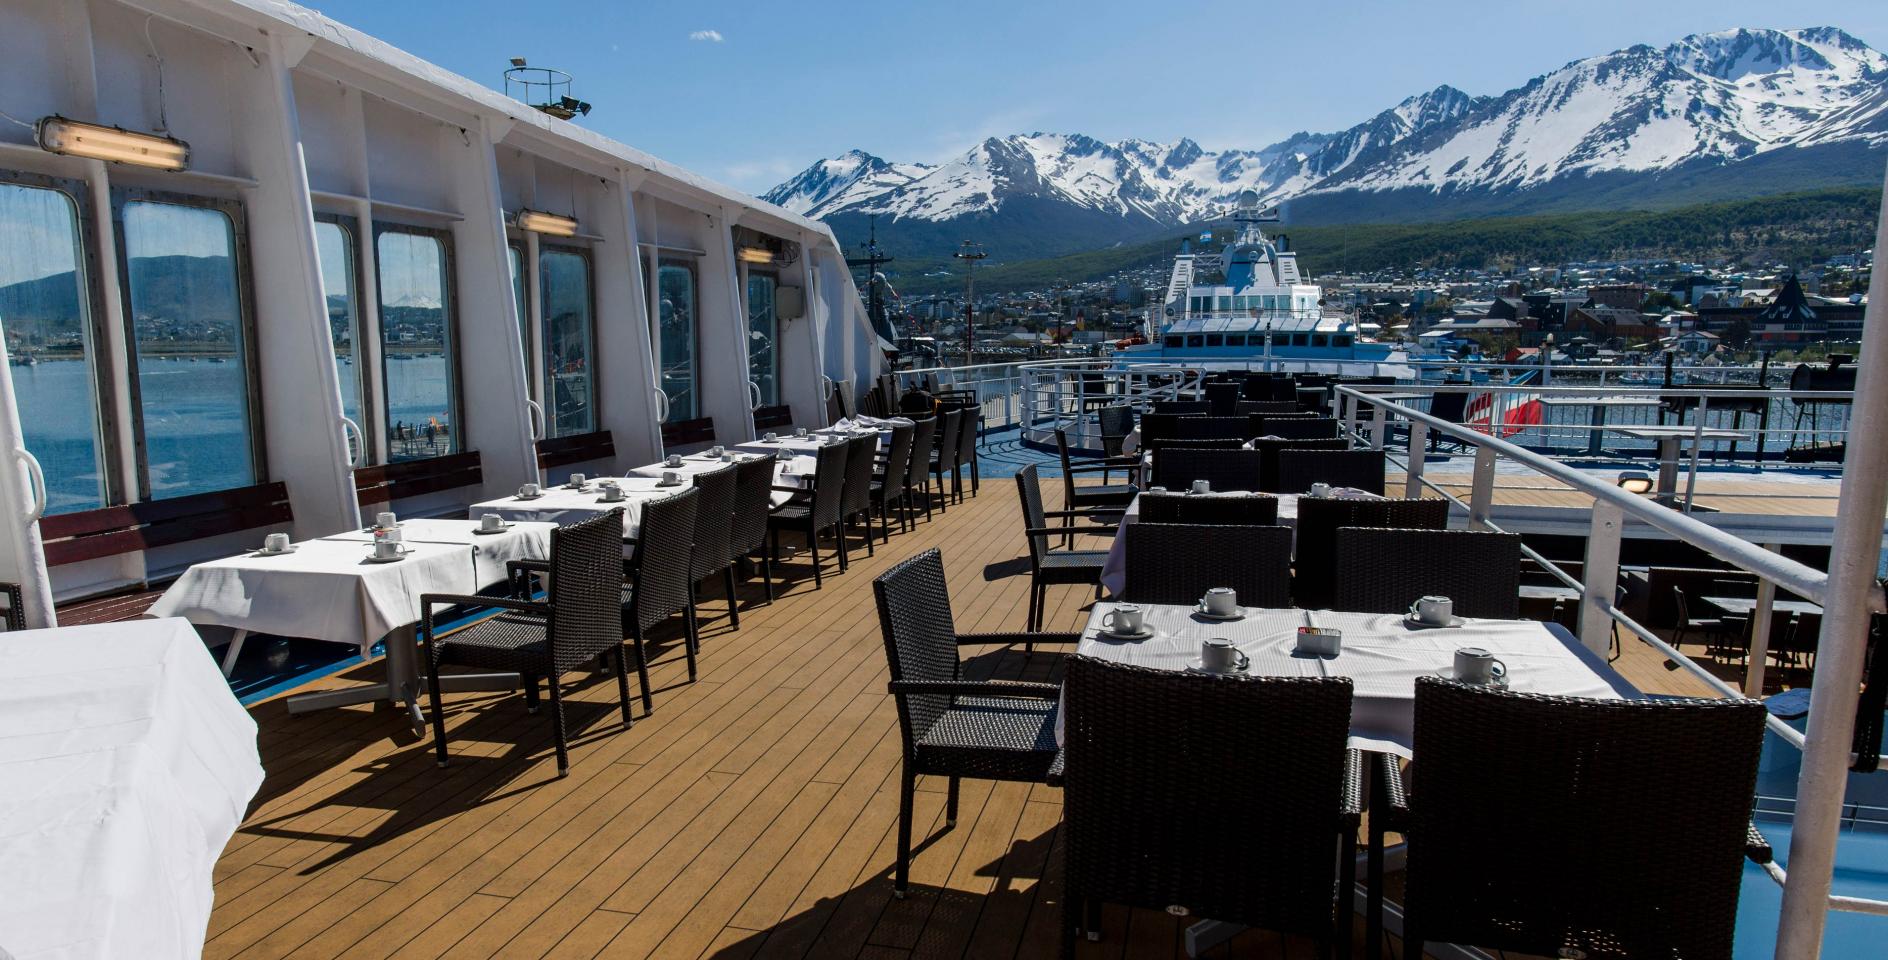 Outdoor dining area on upper deck of Ocean Endeavour, with view of snow-capped mountains beyond